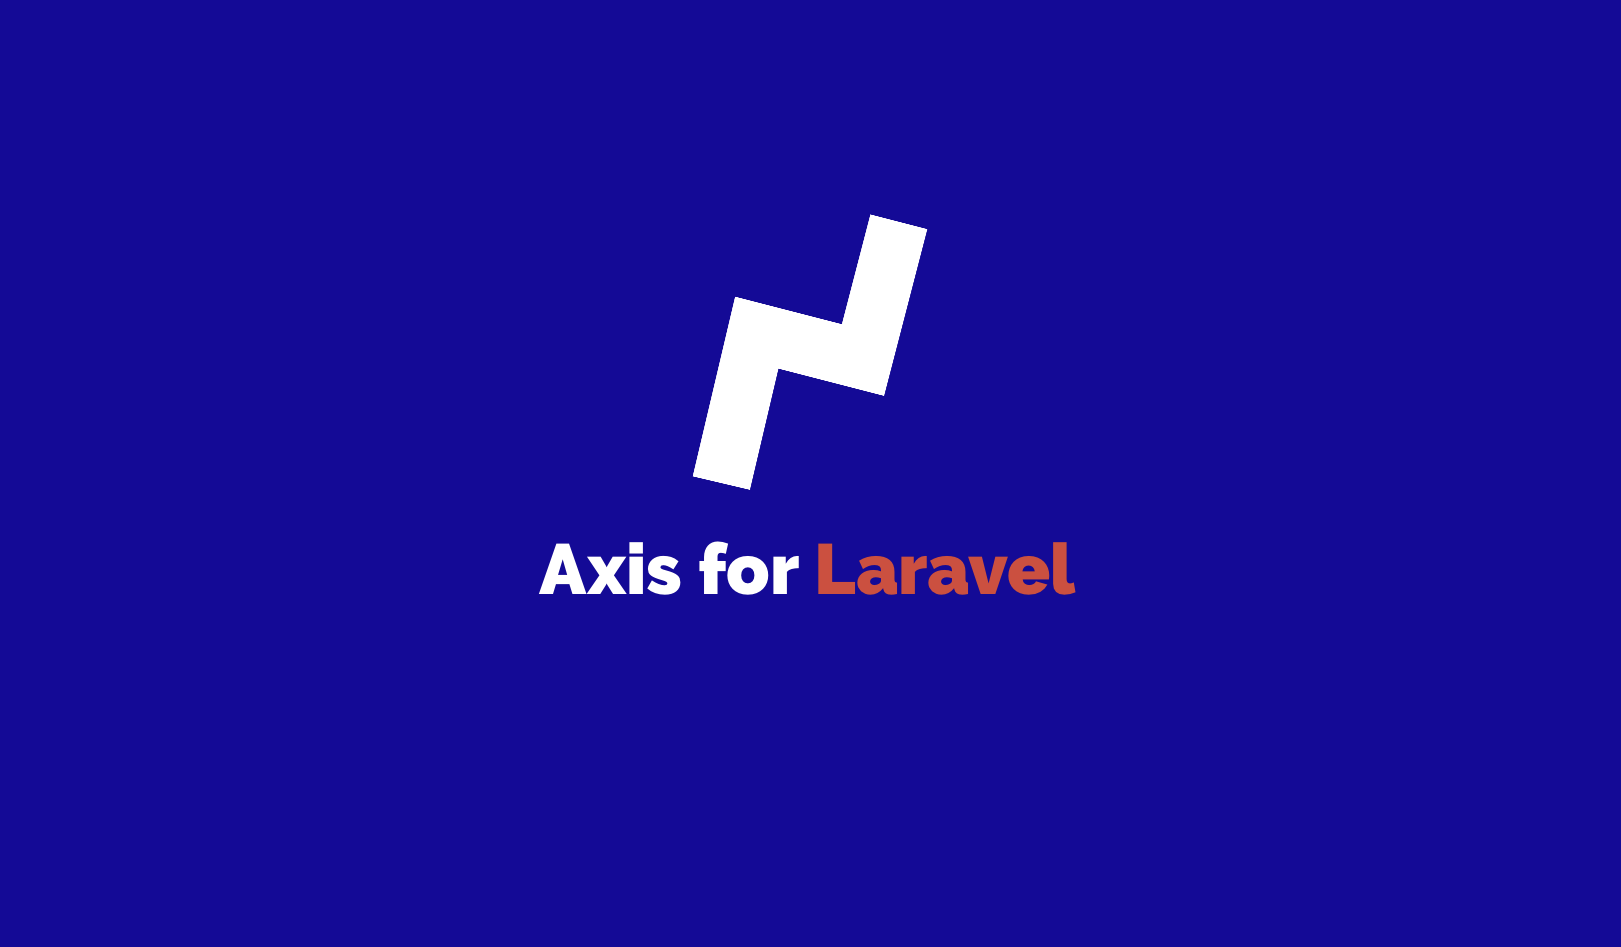 Axis for Laravel